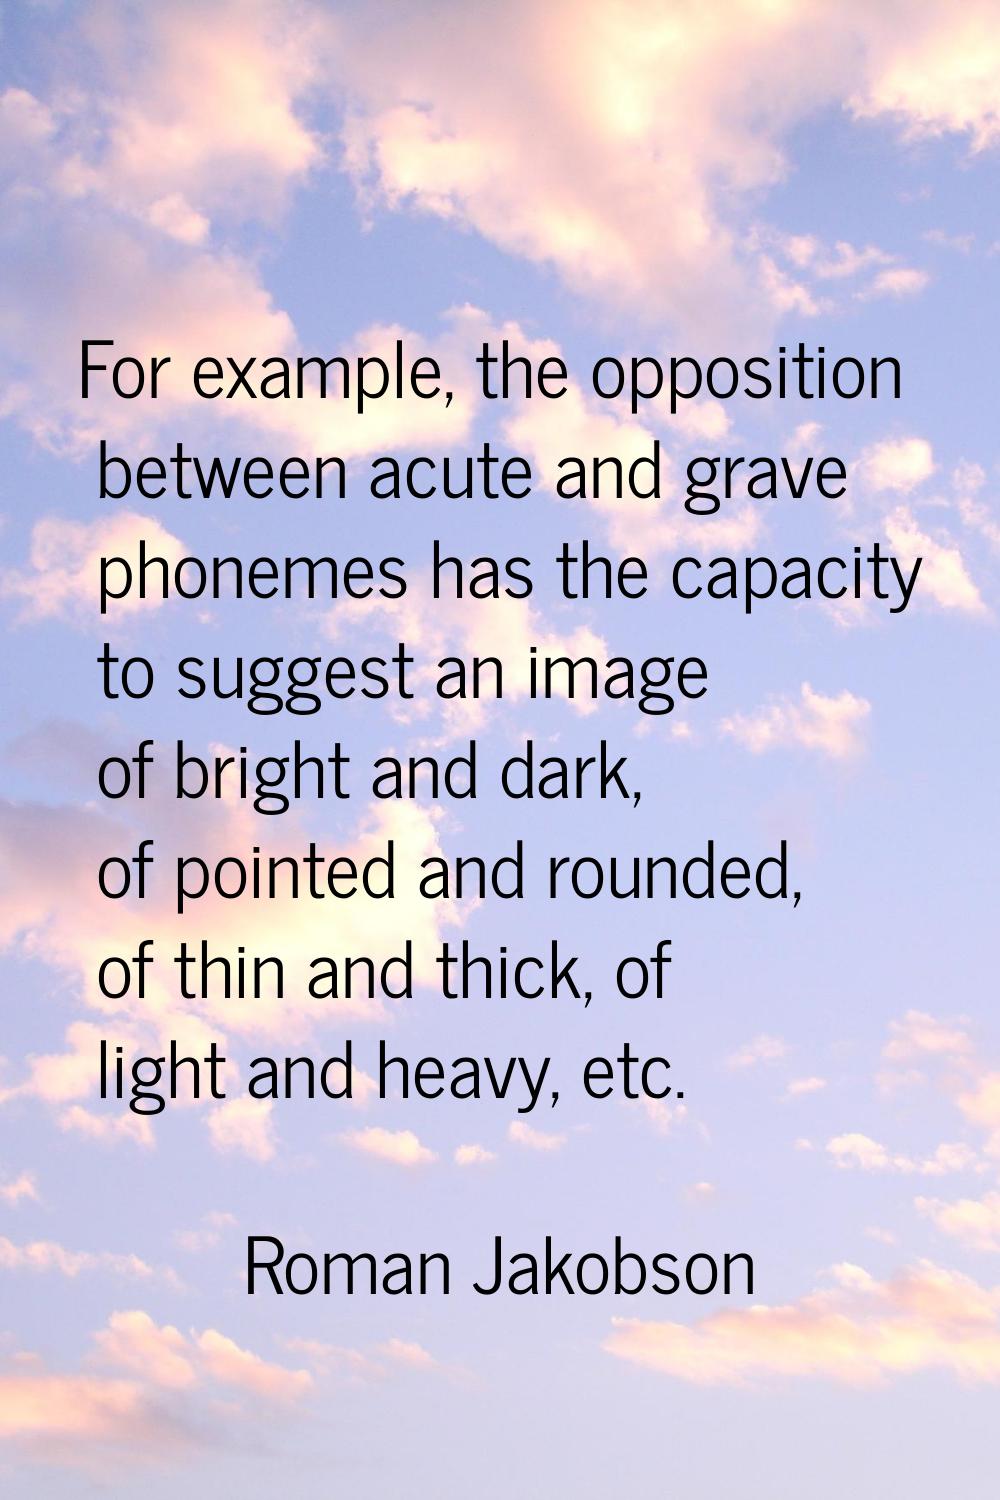 For example, the opposition between acute and grave phonemes has the capacity to suggest an image o